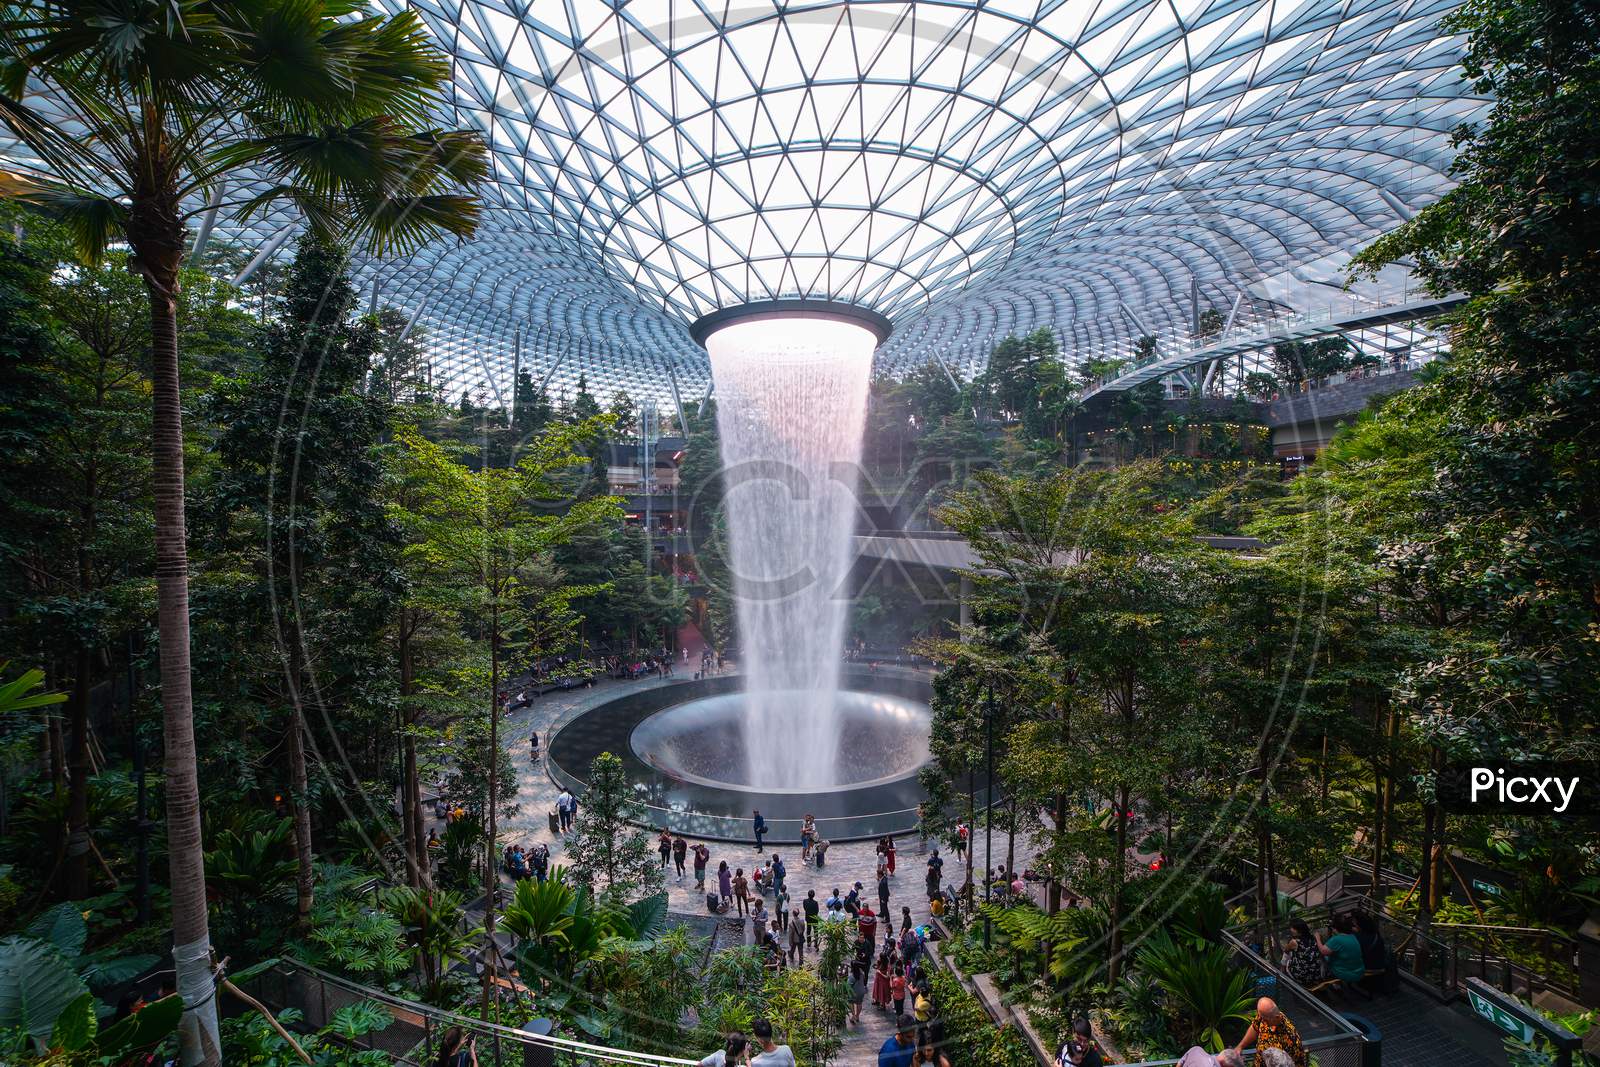 Jewel Changi Airport Rain Vortex. This is the largest indoor waterfall in the world and the centerpiece of Jewel Changi Airport. Singapore